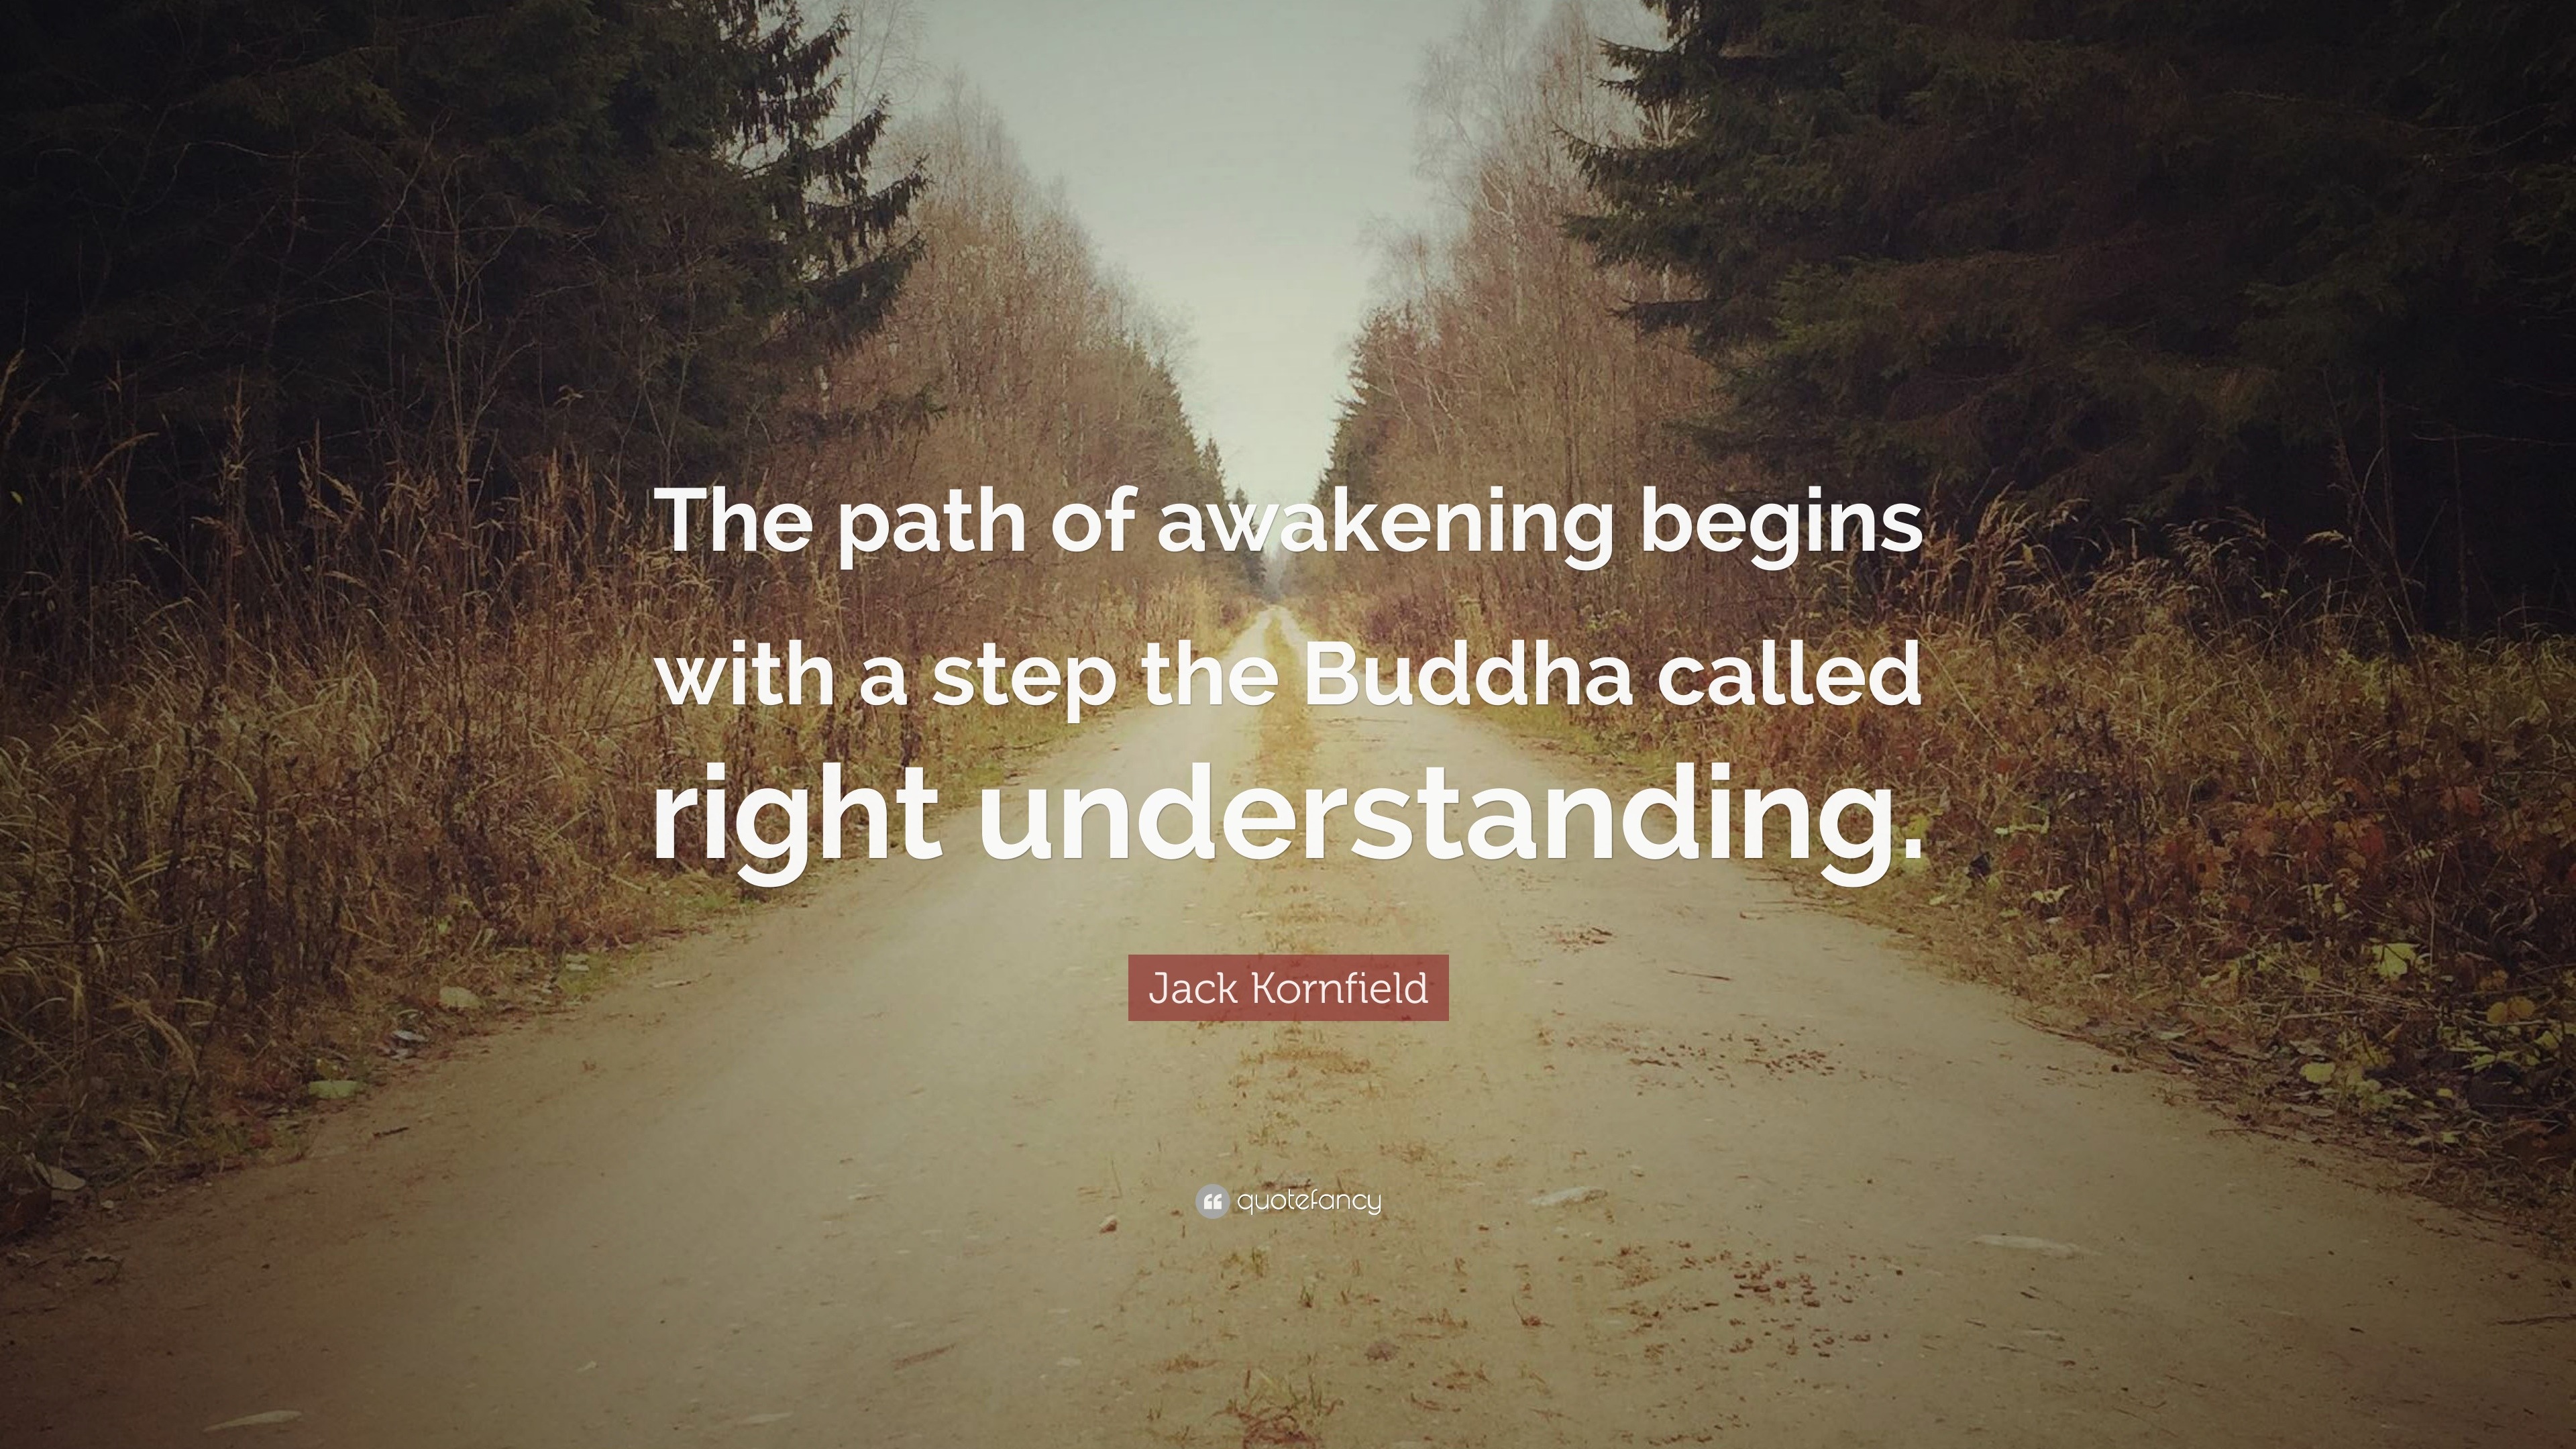 Jack Kornfield Quote: “The path of awakening begins with a step the ...